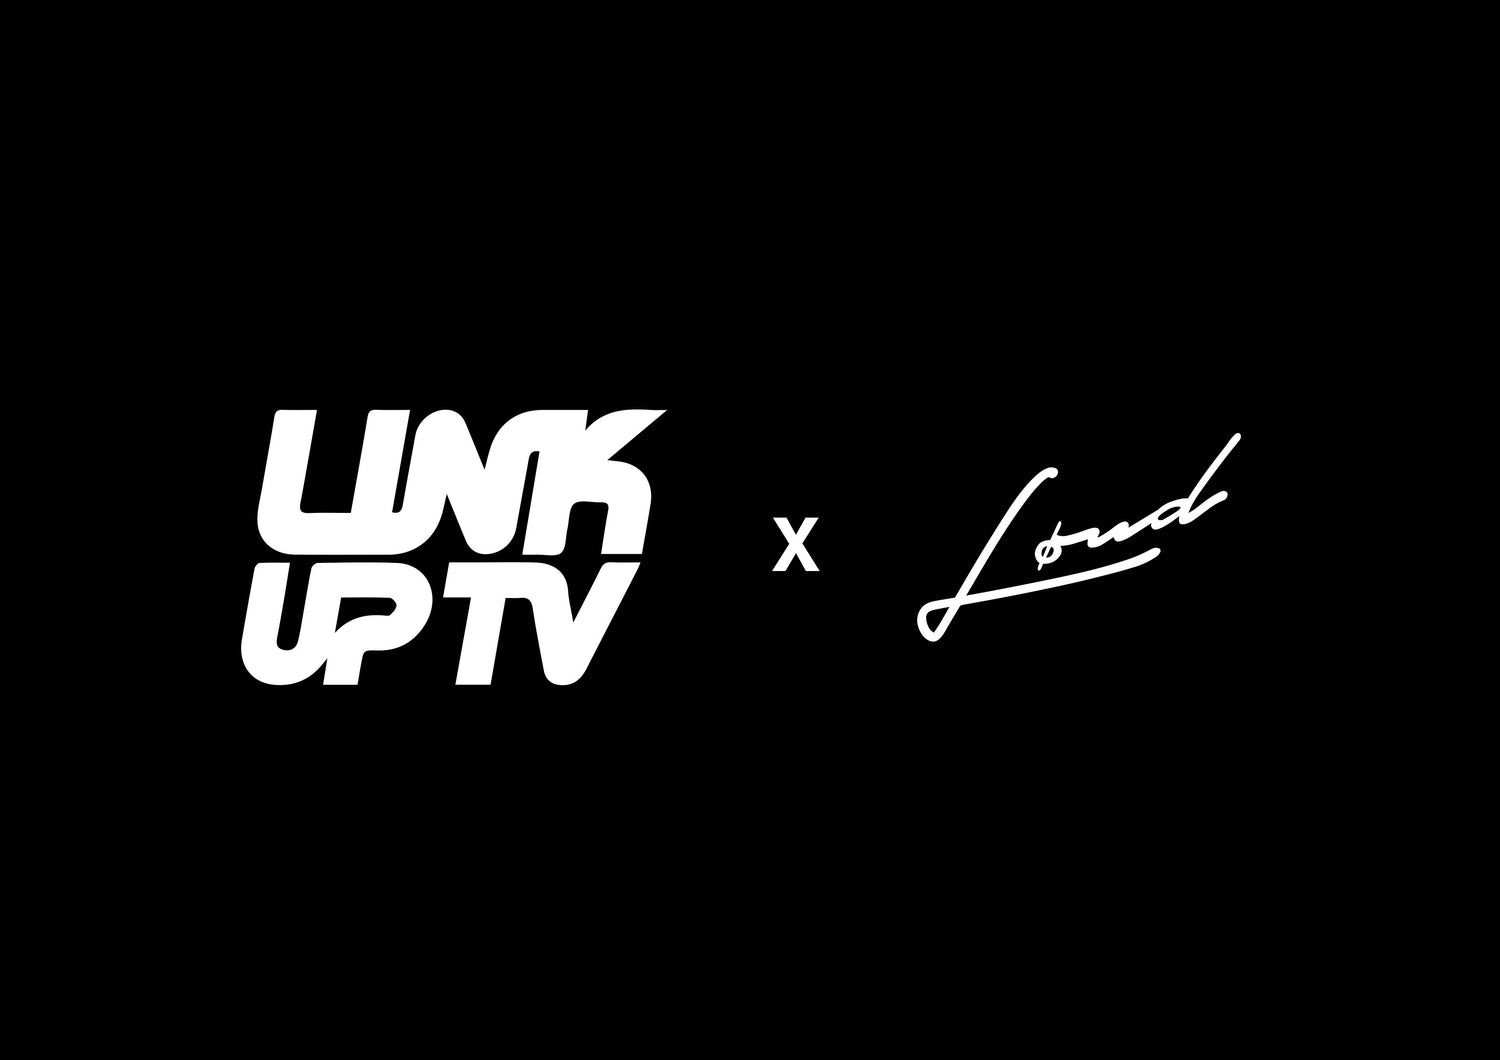 LinkUp TV X LIVELOOKLOUD - The Listening Party